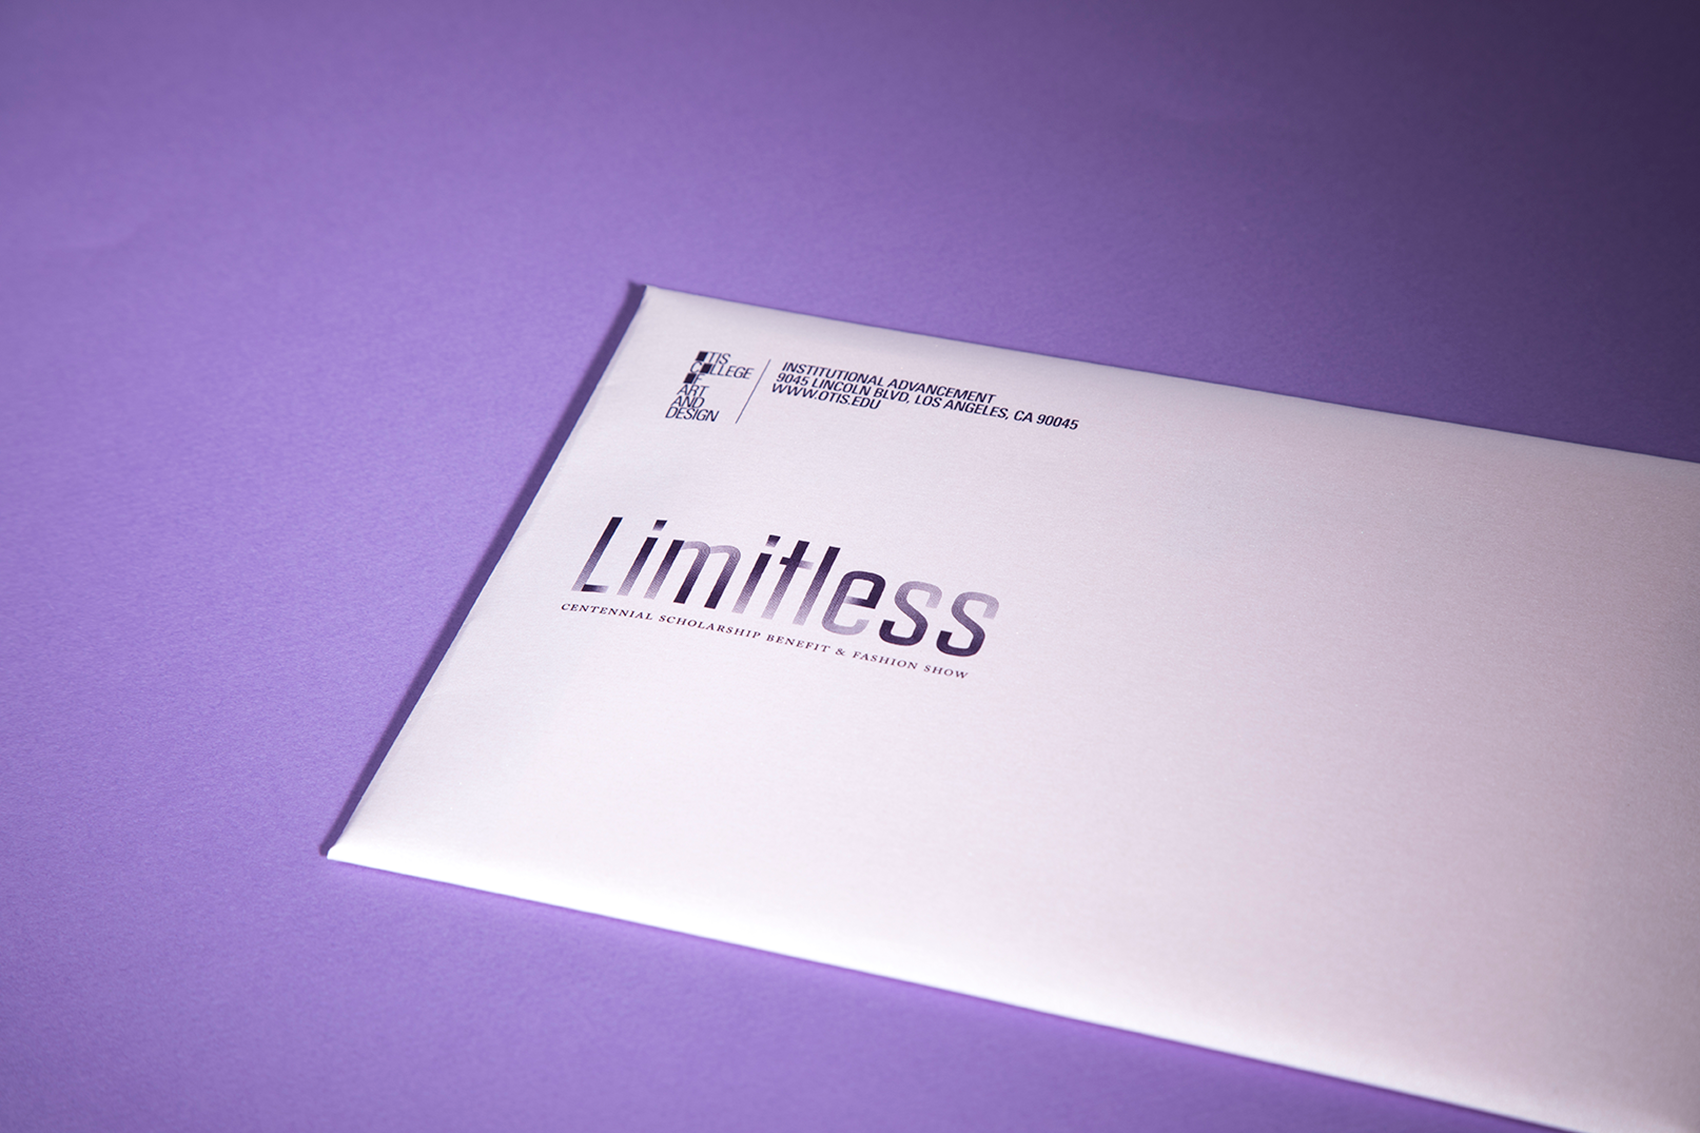 Envelope detail with Limitless art printed on it